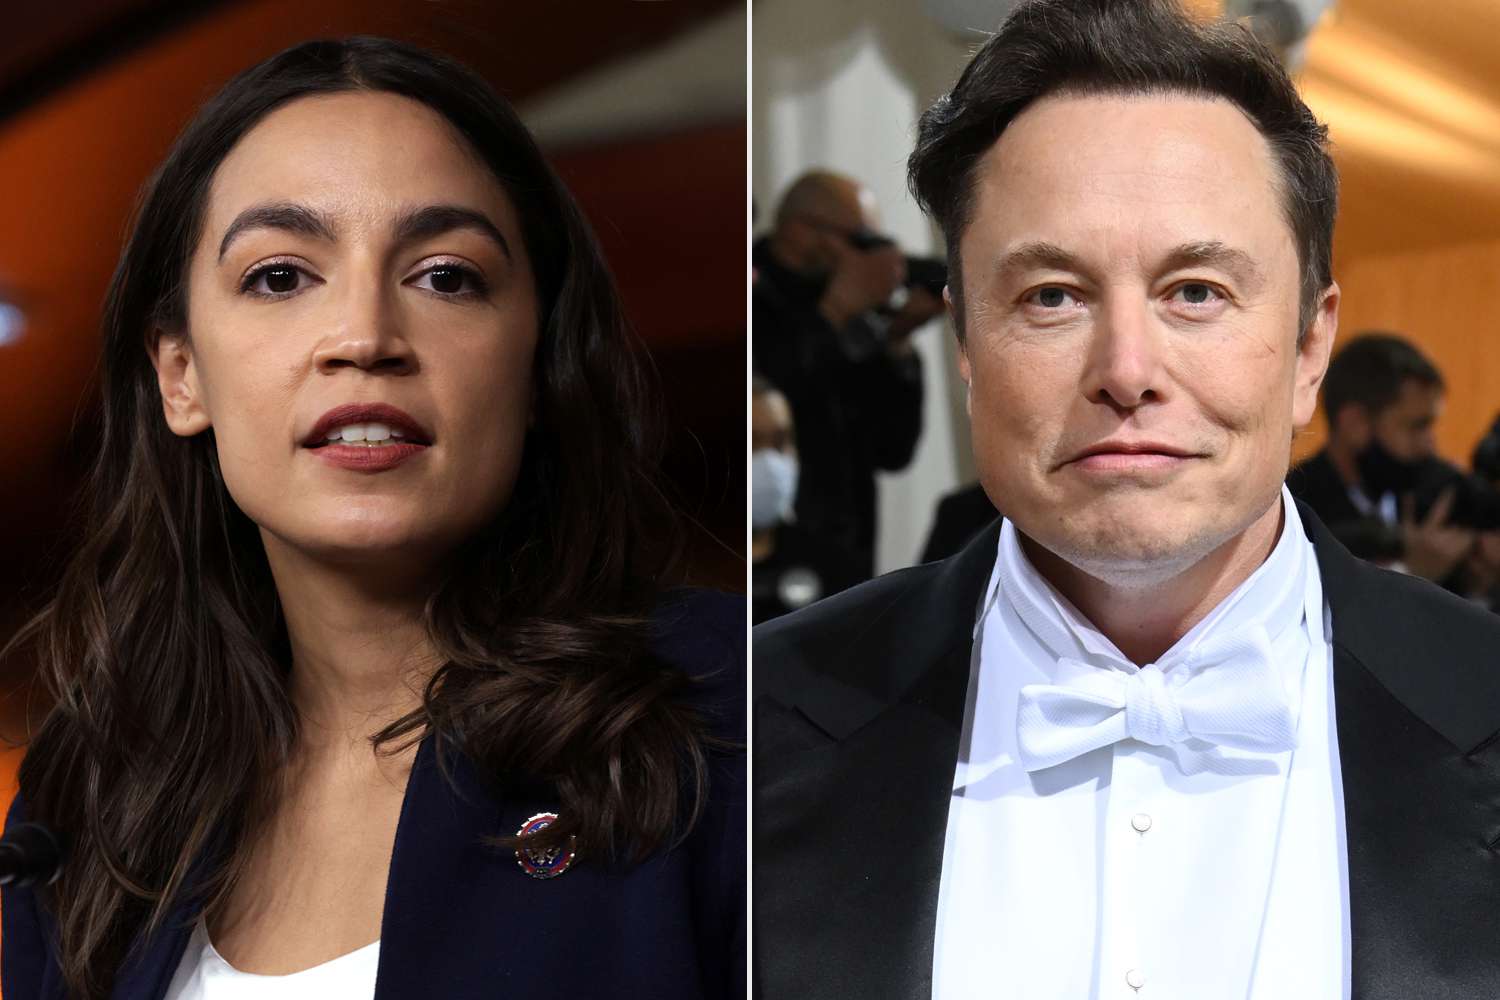 Oh-My: Elon Musk Clowns AOC Over Latest Anti-Billionaire Rant, Makes Her Look Silly With His Response